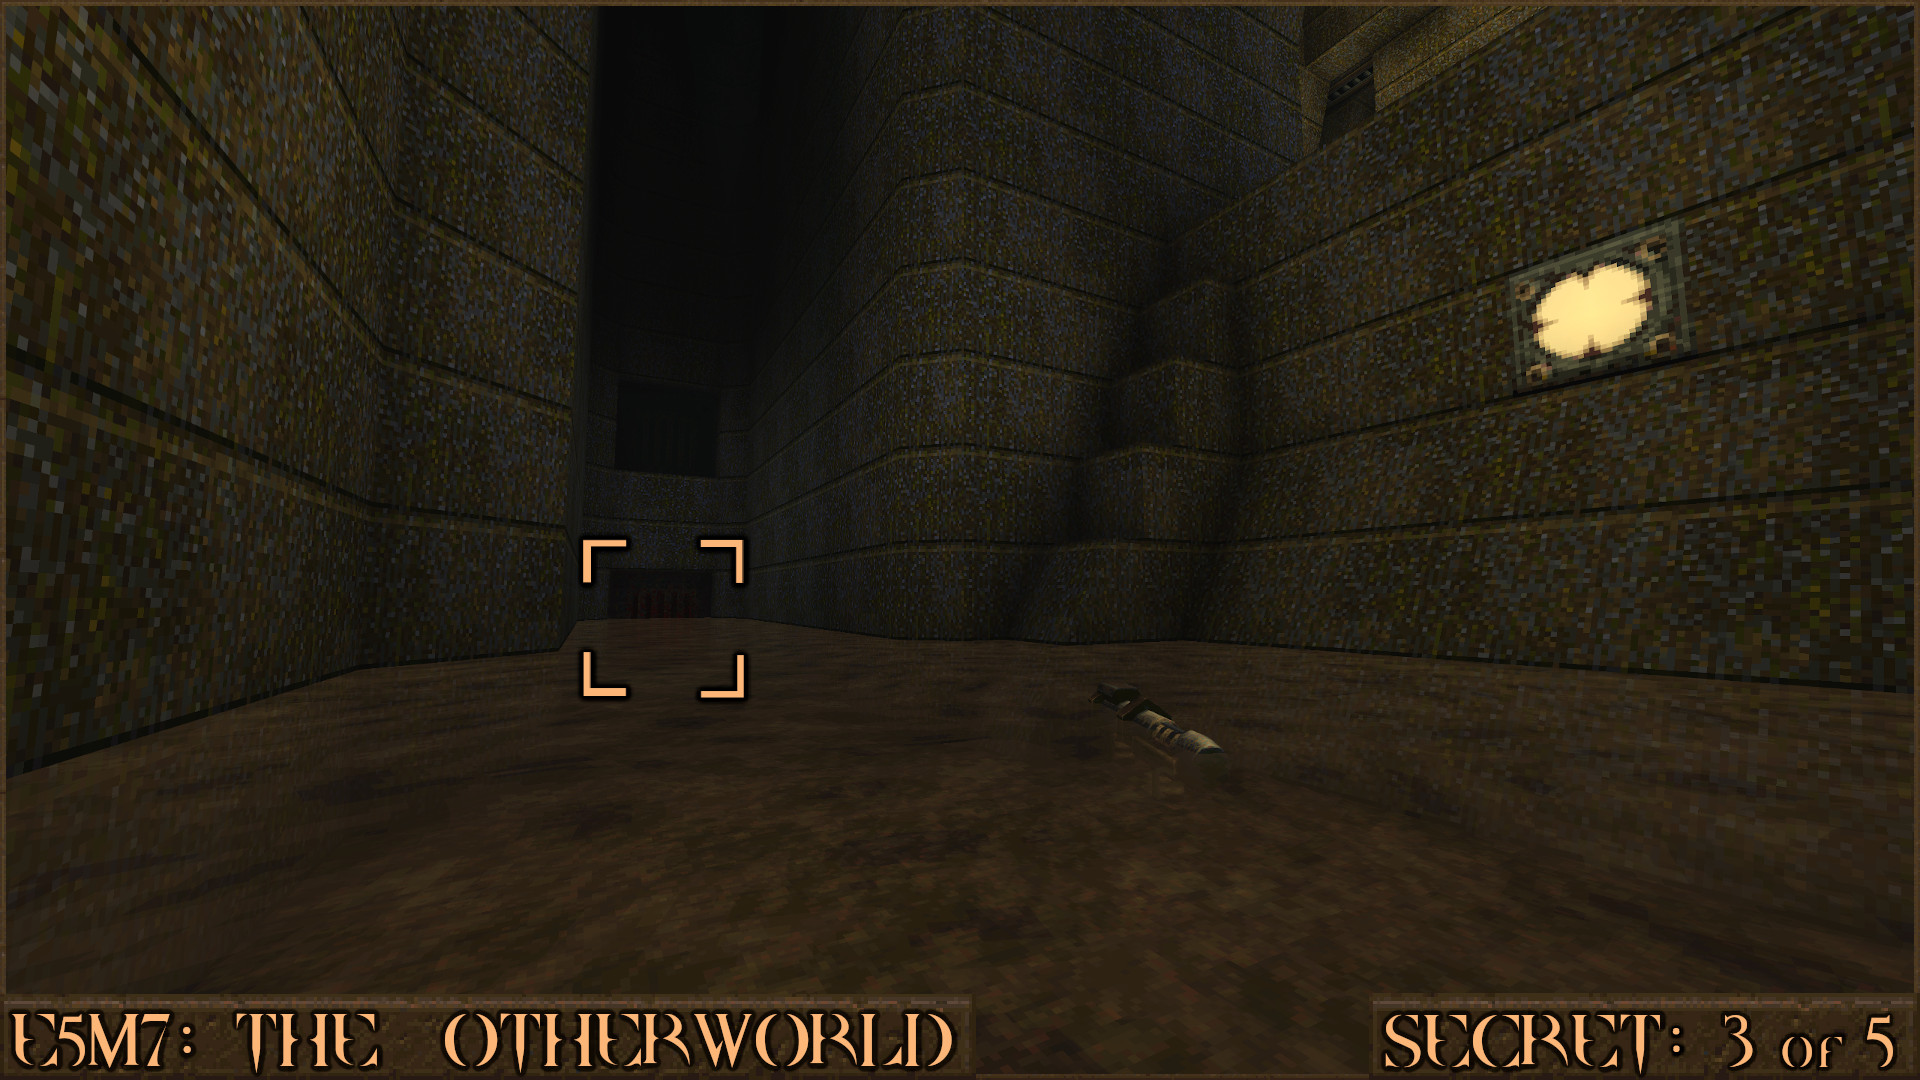 Quake Finding All Secrets in Quake Expansion pack: Dimension of the Past - E5M7: The Otherworld - 7CC61CF